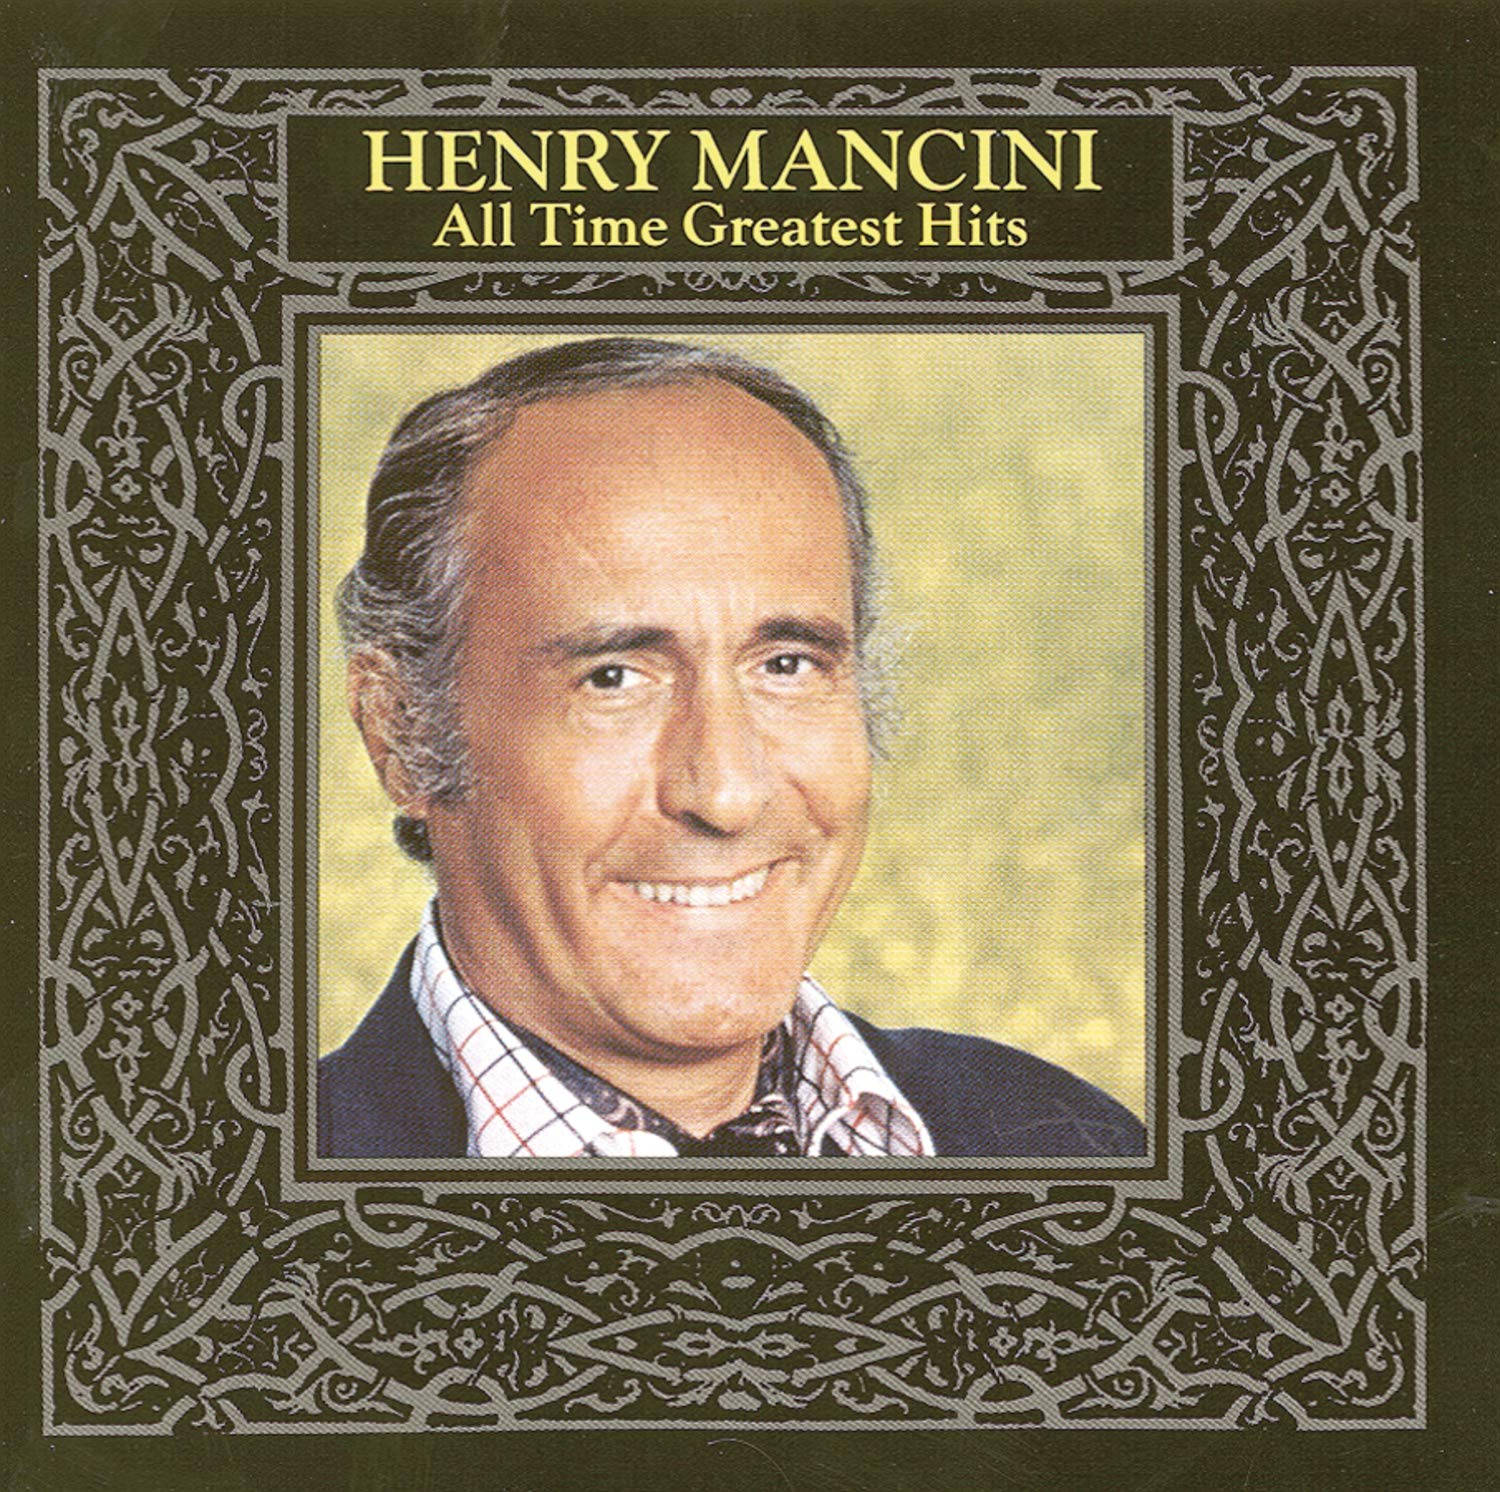 Henry Mancini All Time Greatest Hits Wallpaper